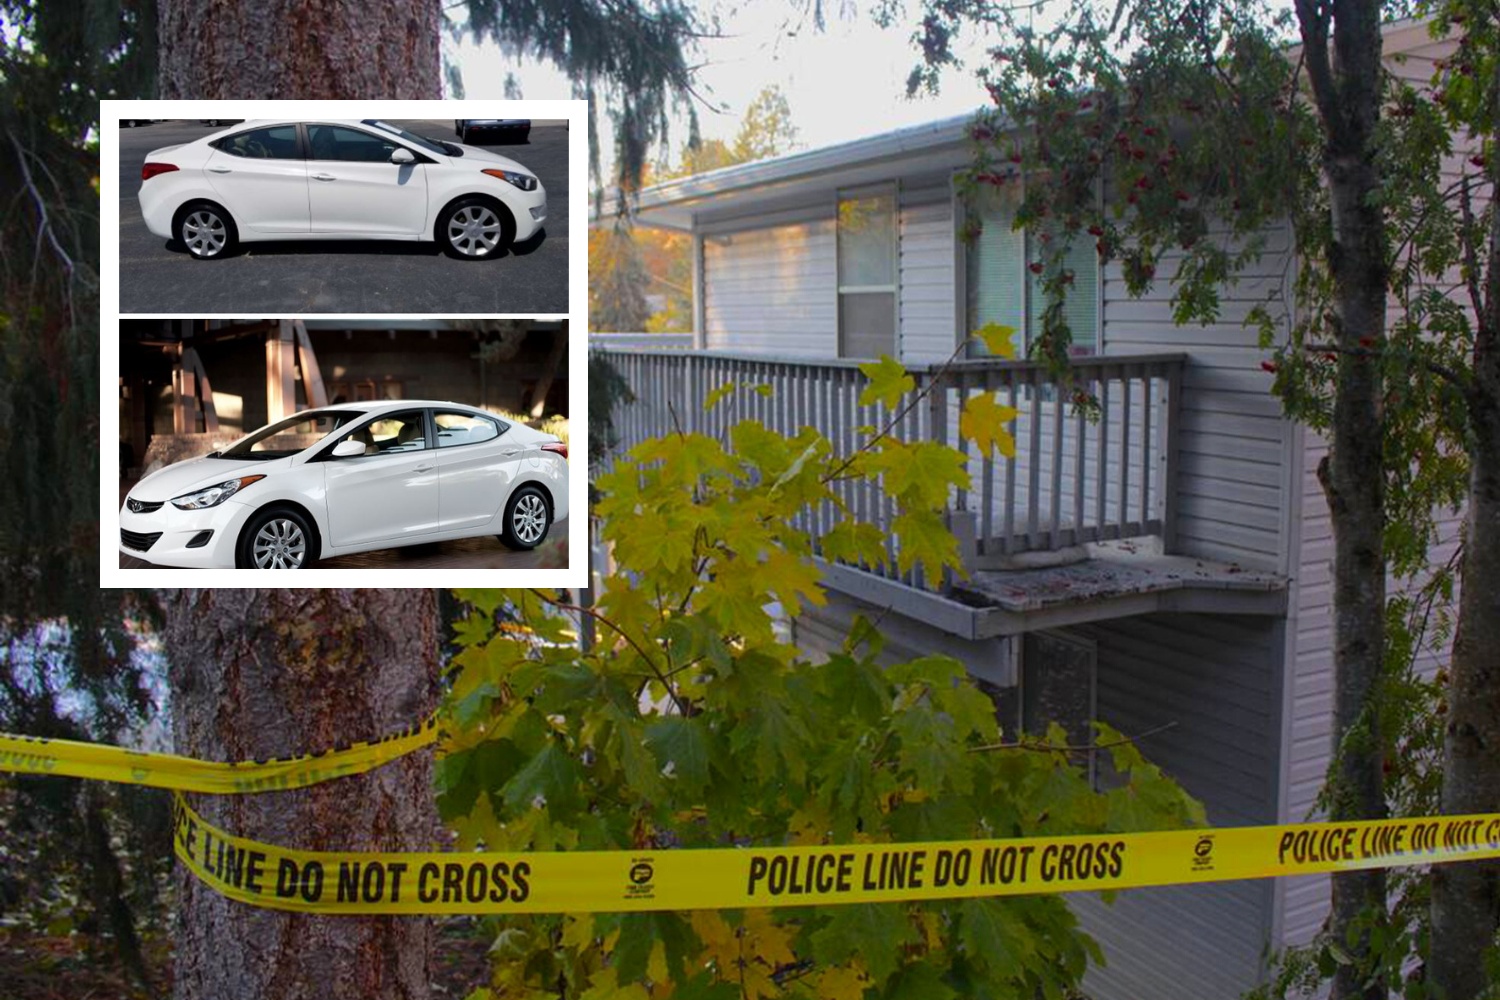 Police Alerted to Abandoned White Car Found in Oregon